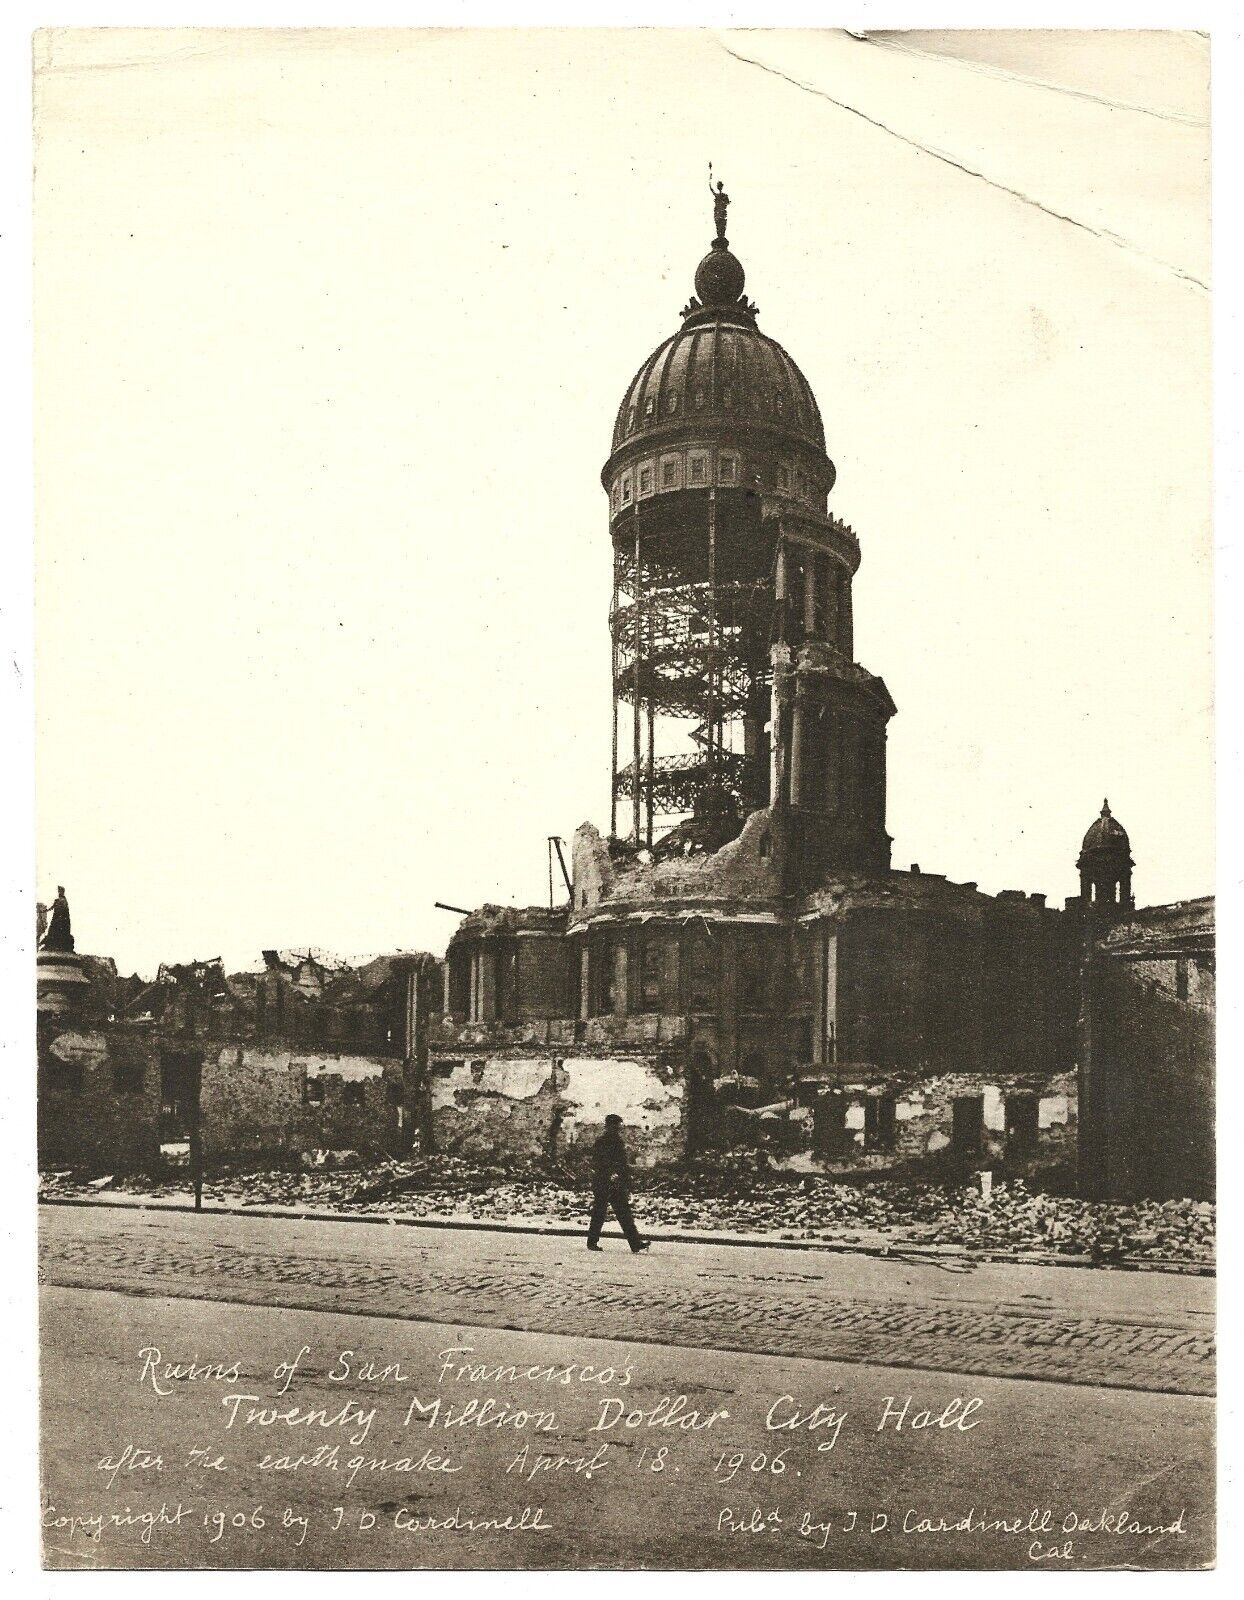 Large Vintage 1906 Photo of San Francisco City Hall after Earthquake by Cardinel